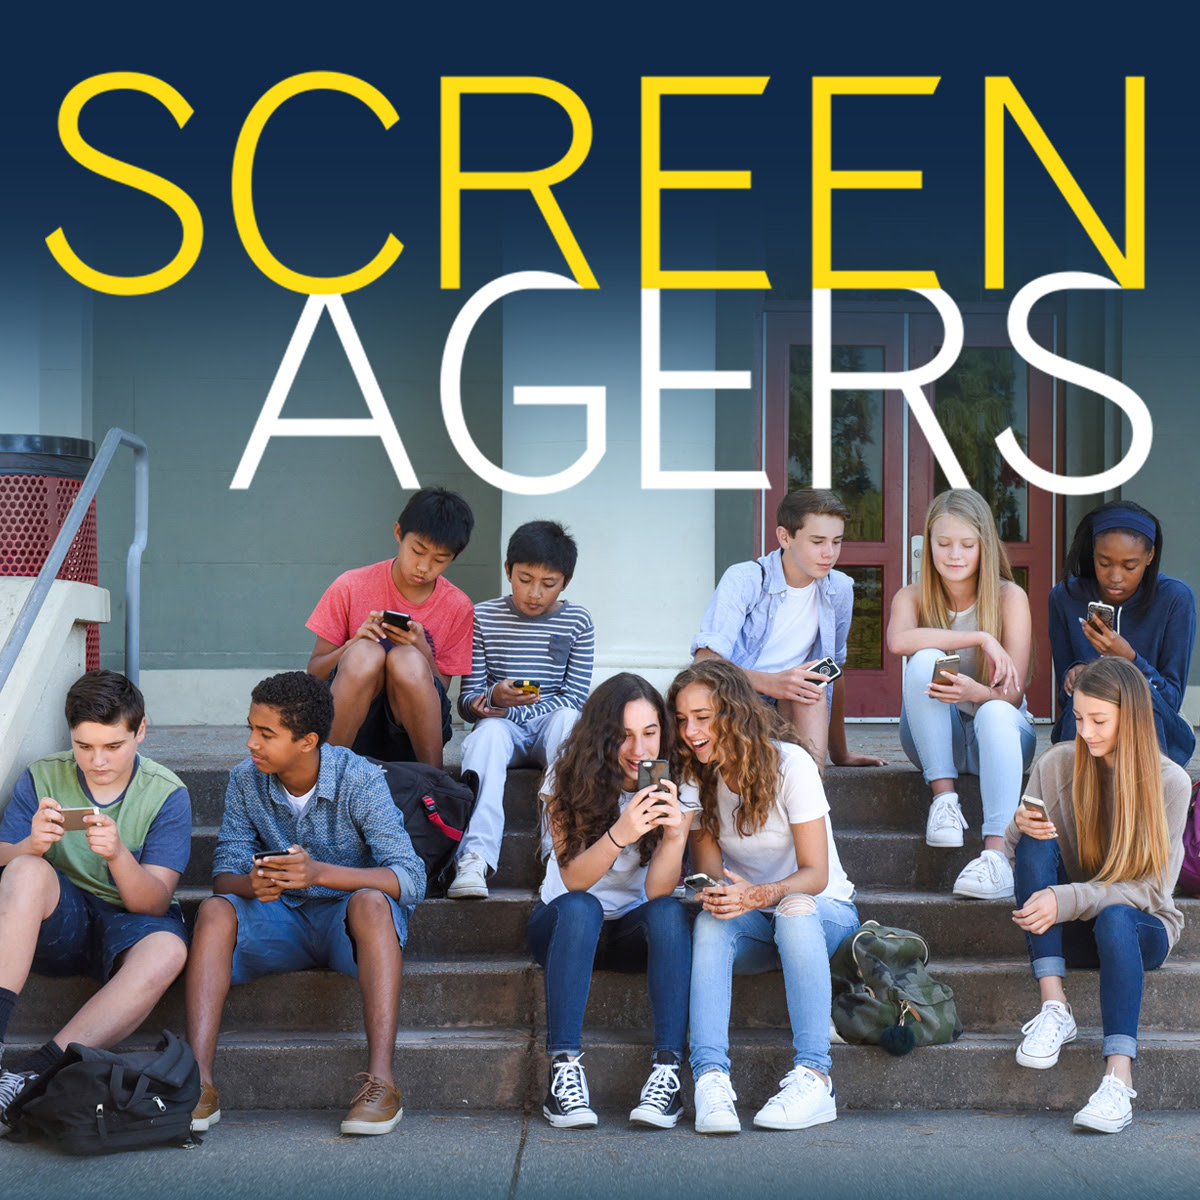 Screenagers Film Presented By Mackay Youth Support Service Inc